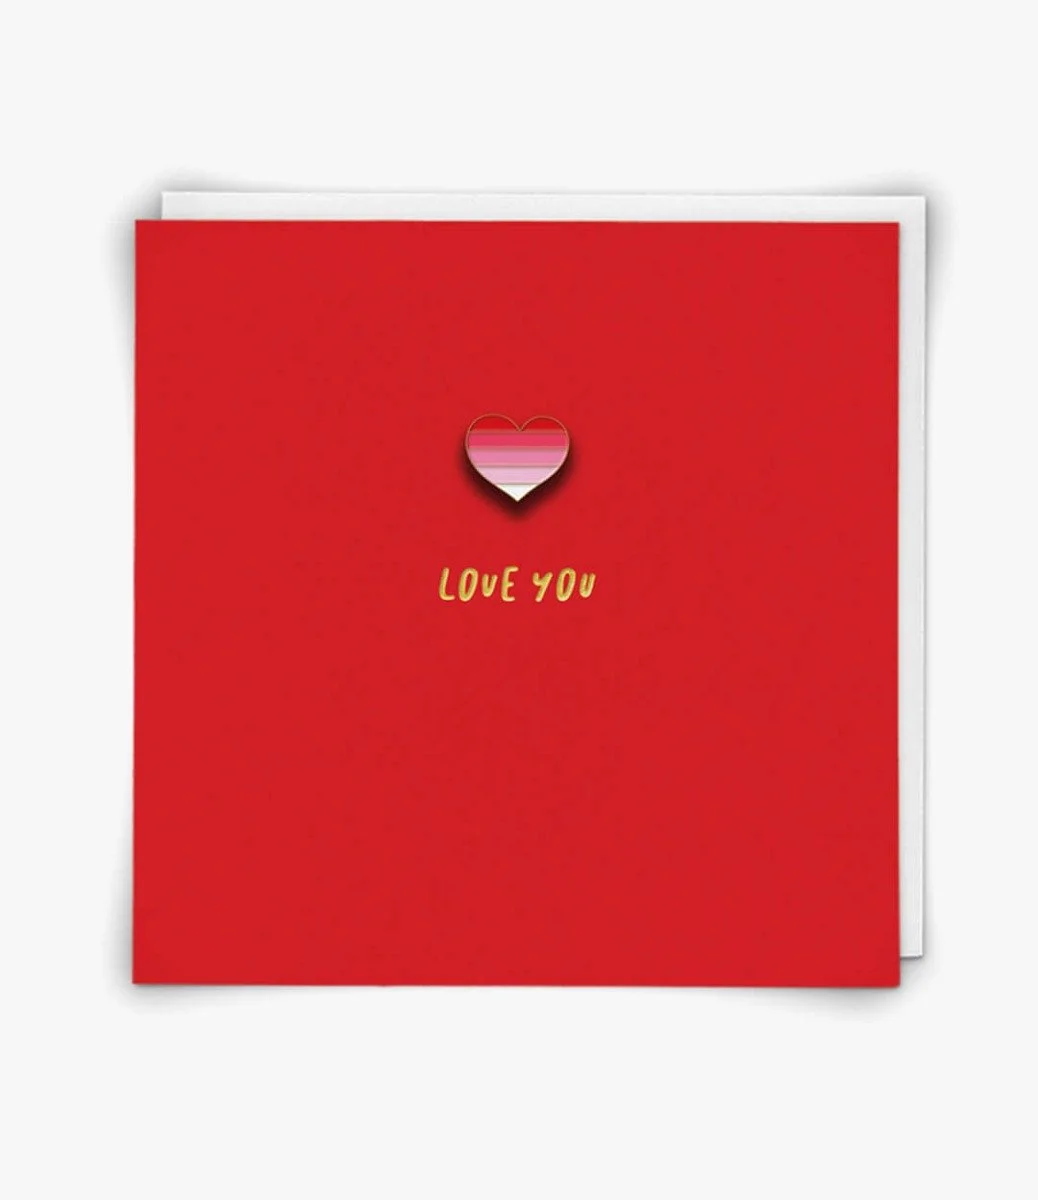 "Love you" Contemporary Greeting Card by Redback